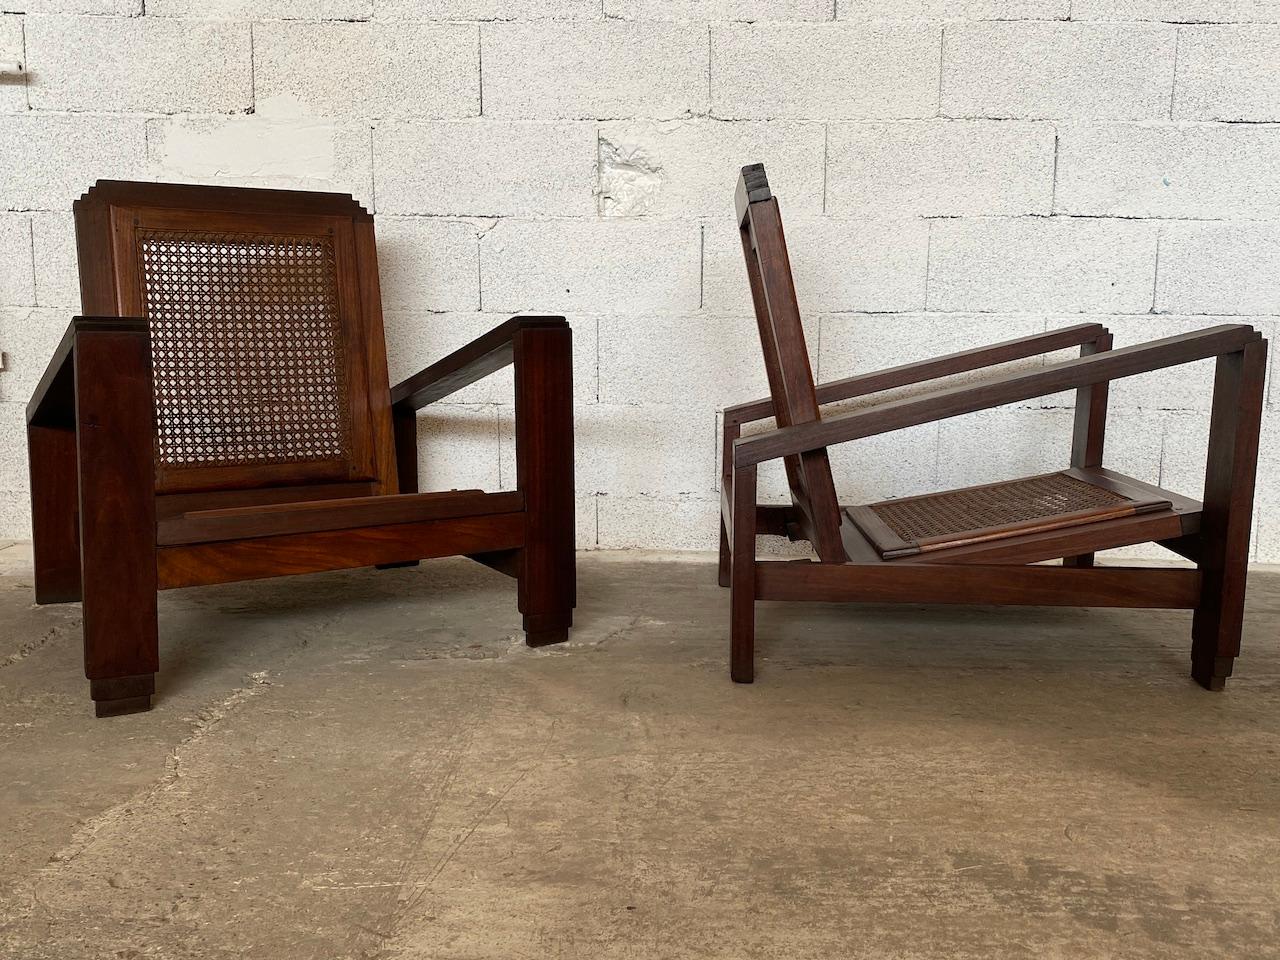 Pair of French Art Deco 1930 colonial armchairs in solid mahogany, caned seats and backs in good condition. Rocking back and seats. From a plantation in the Ivory Coast. 
In the taste of chandigarh. 
Measures: Seat height 27 cm.
H83 x L72 x P77.